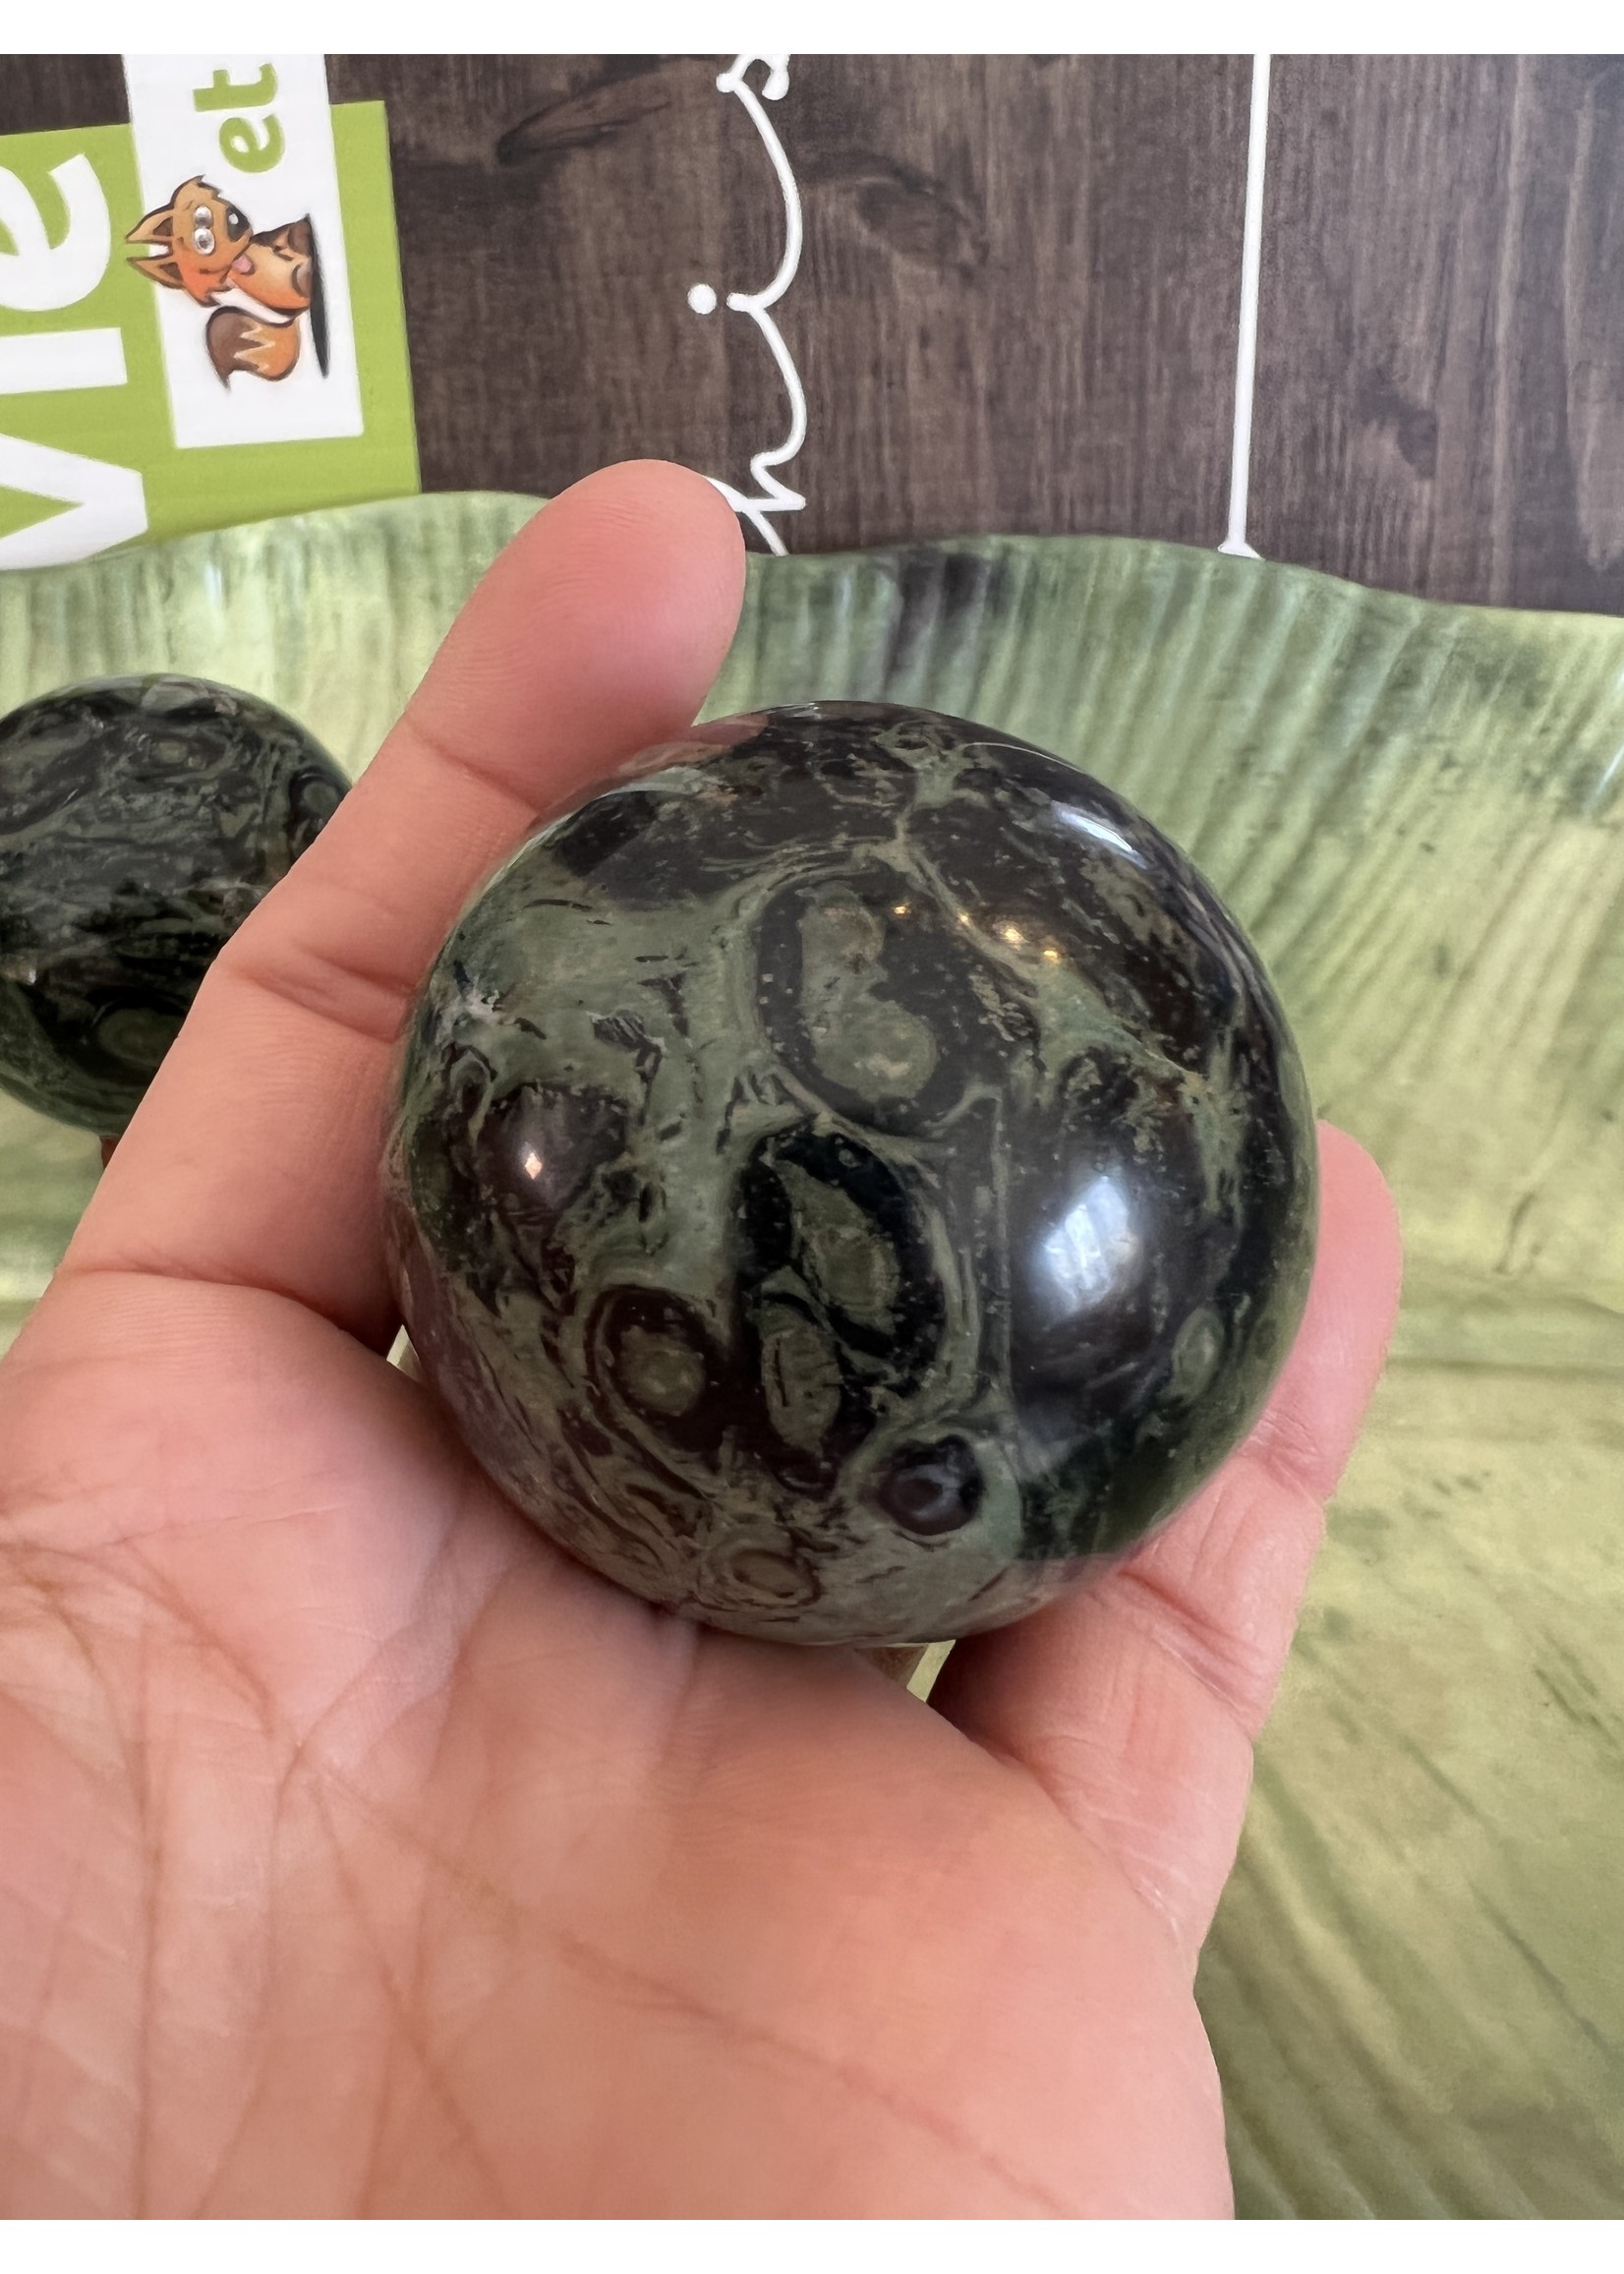 pretty sphere kambaba jasper, helps to enjoy the present moment without dwelling on the past or being anxious about the future